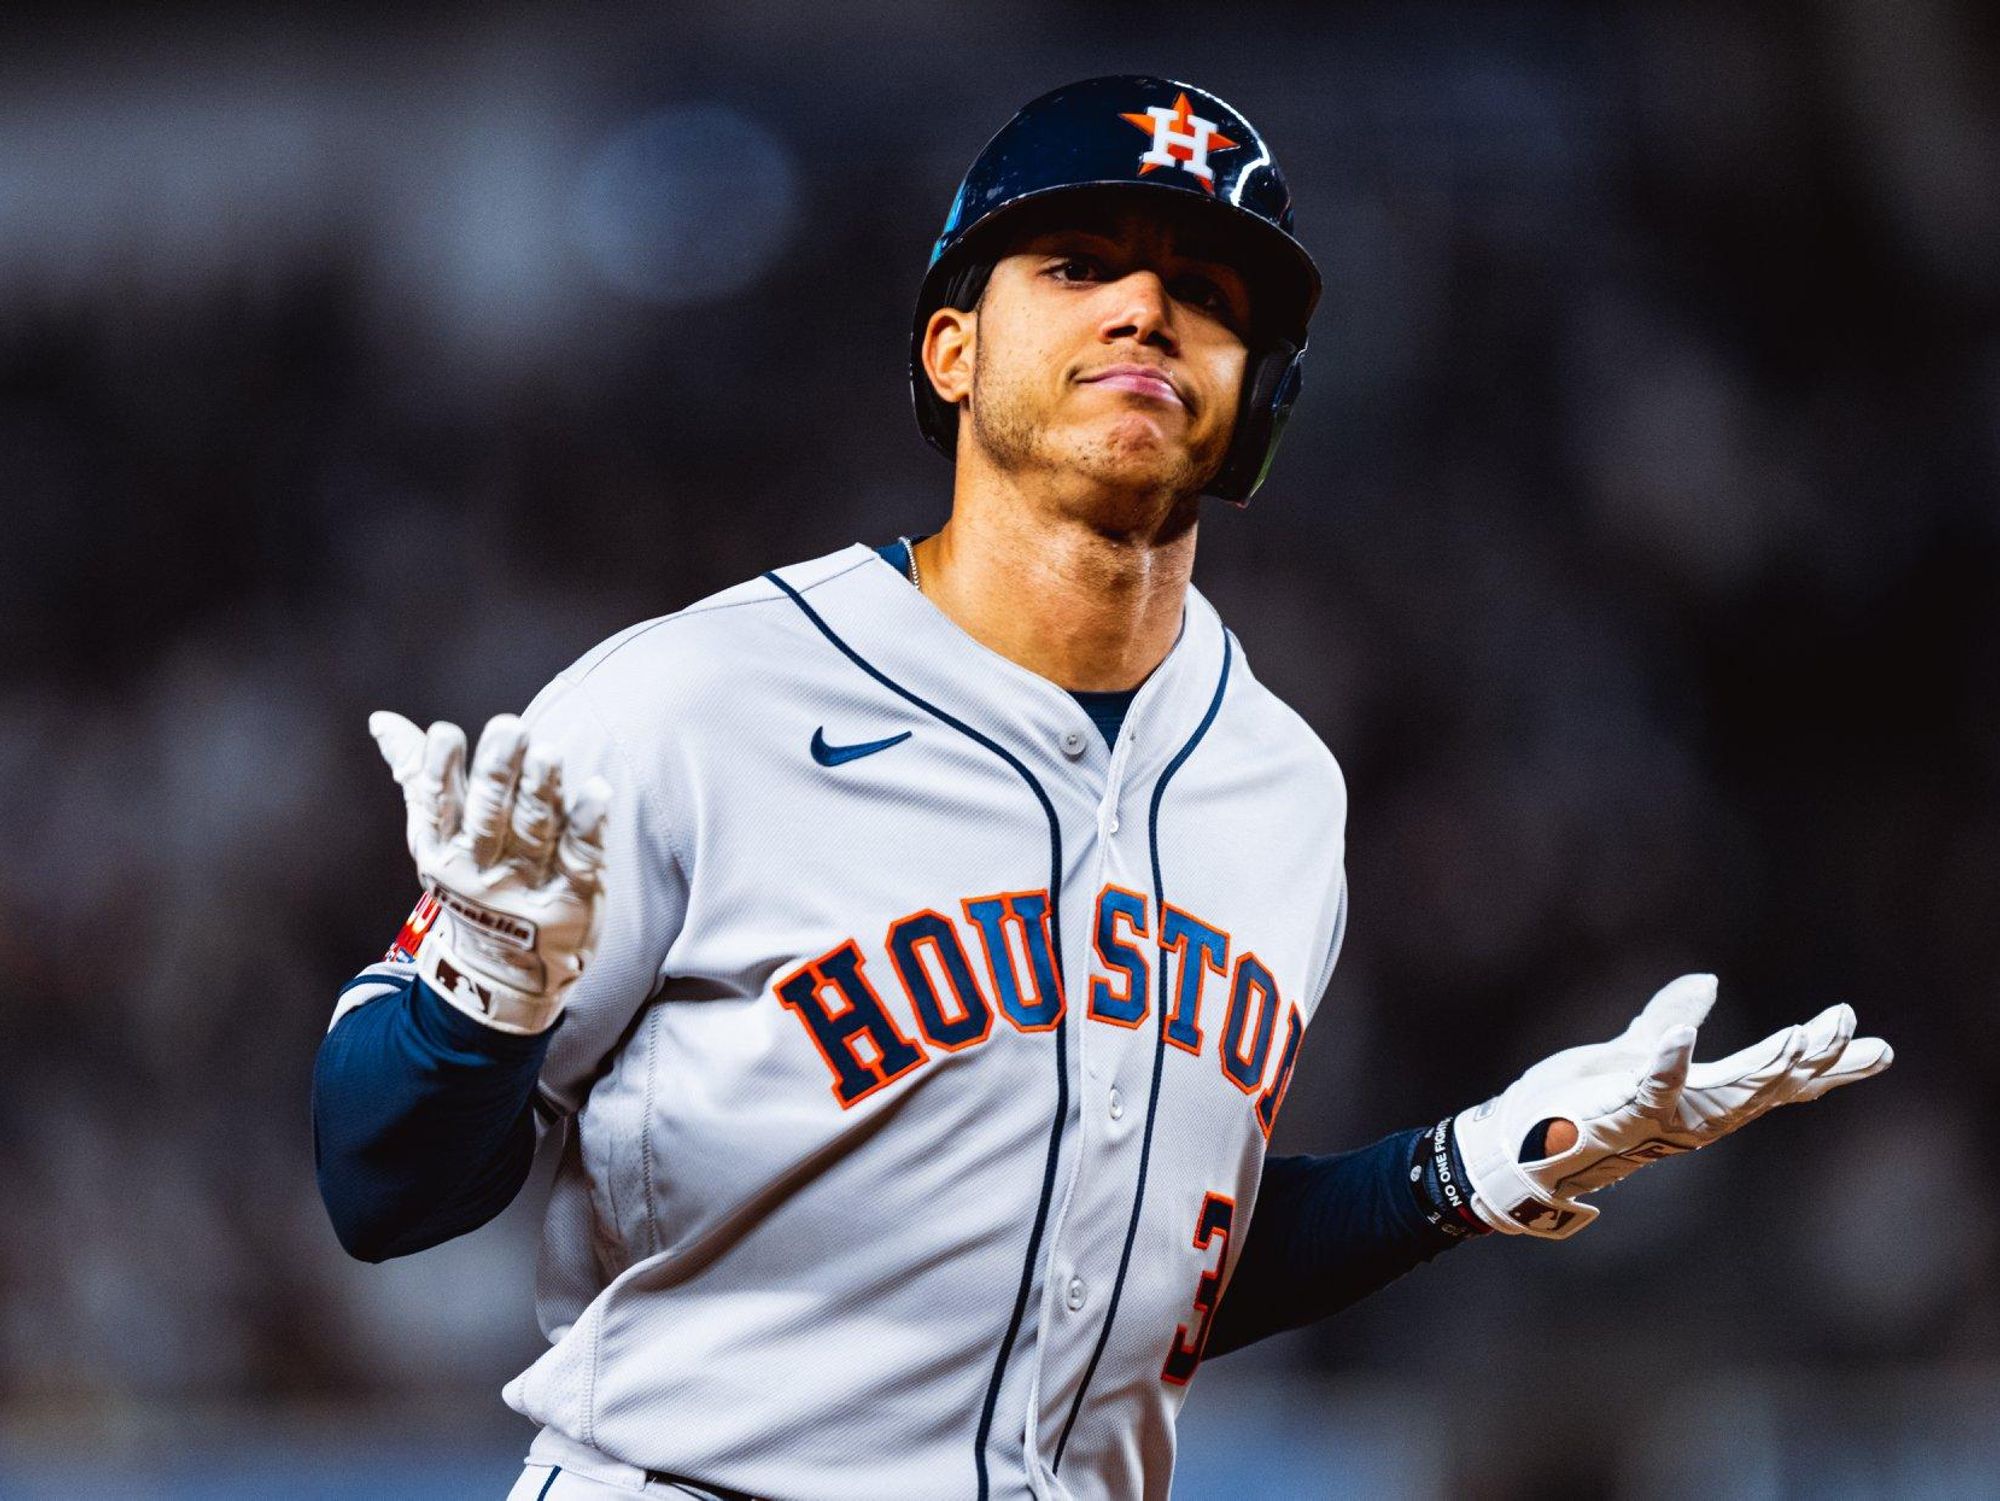 Here's further proof that Houston Astros have beaten their haters